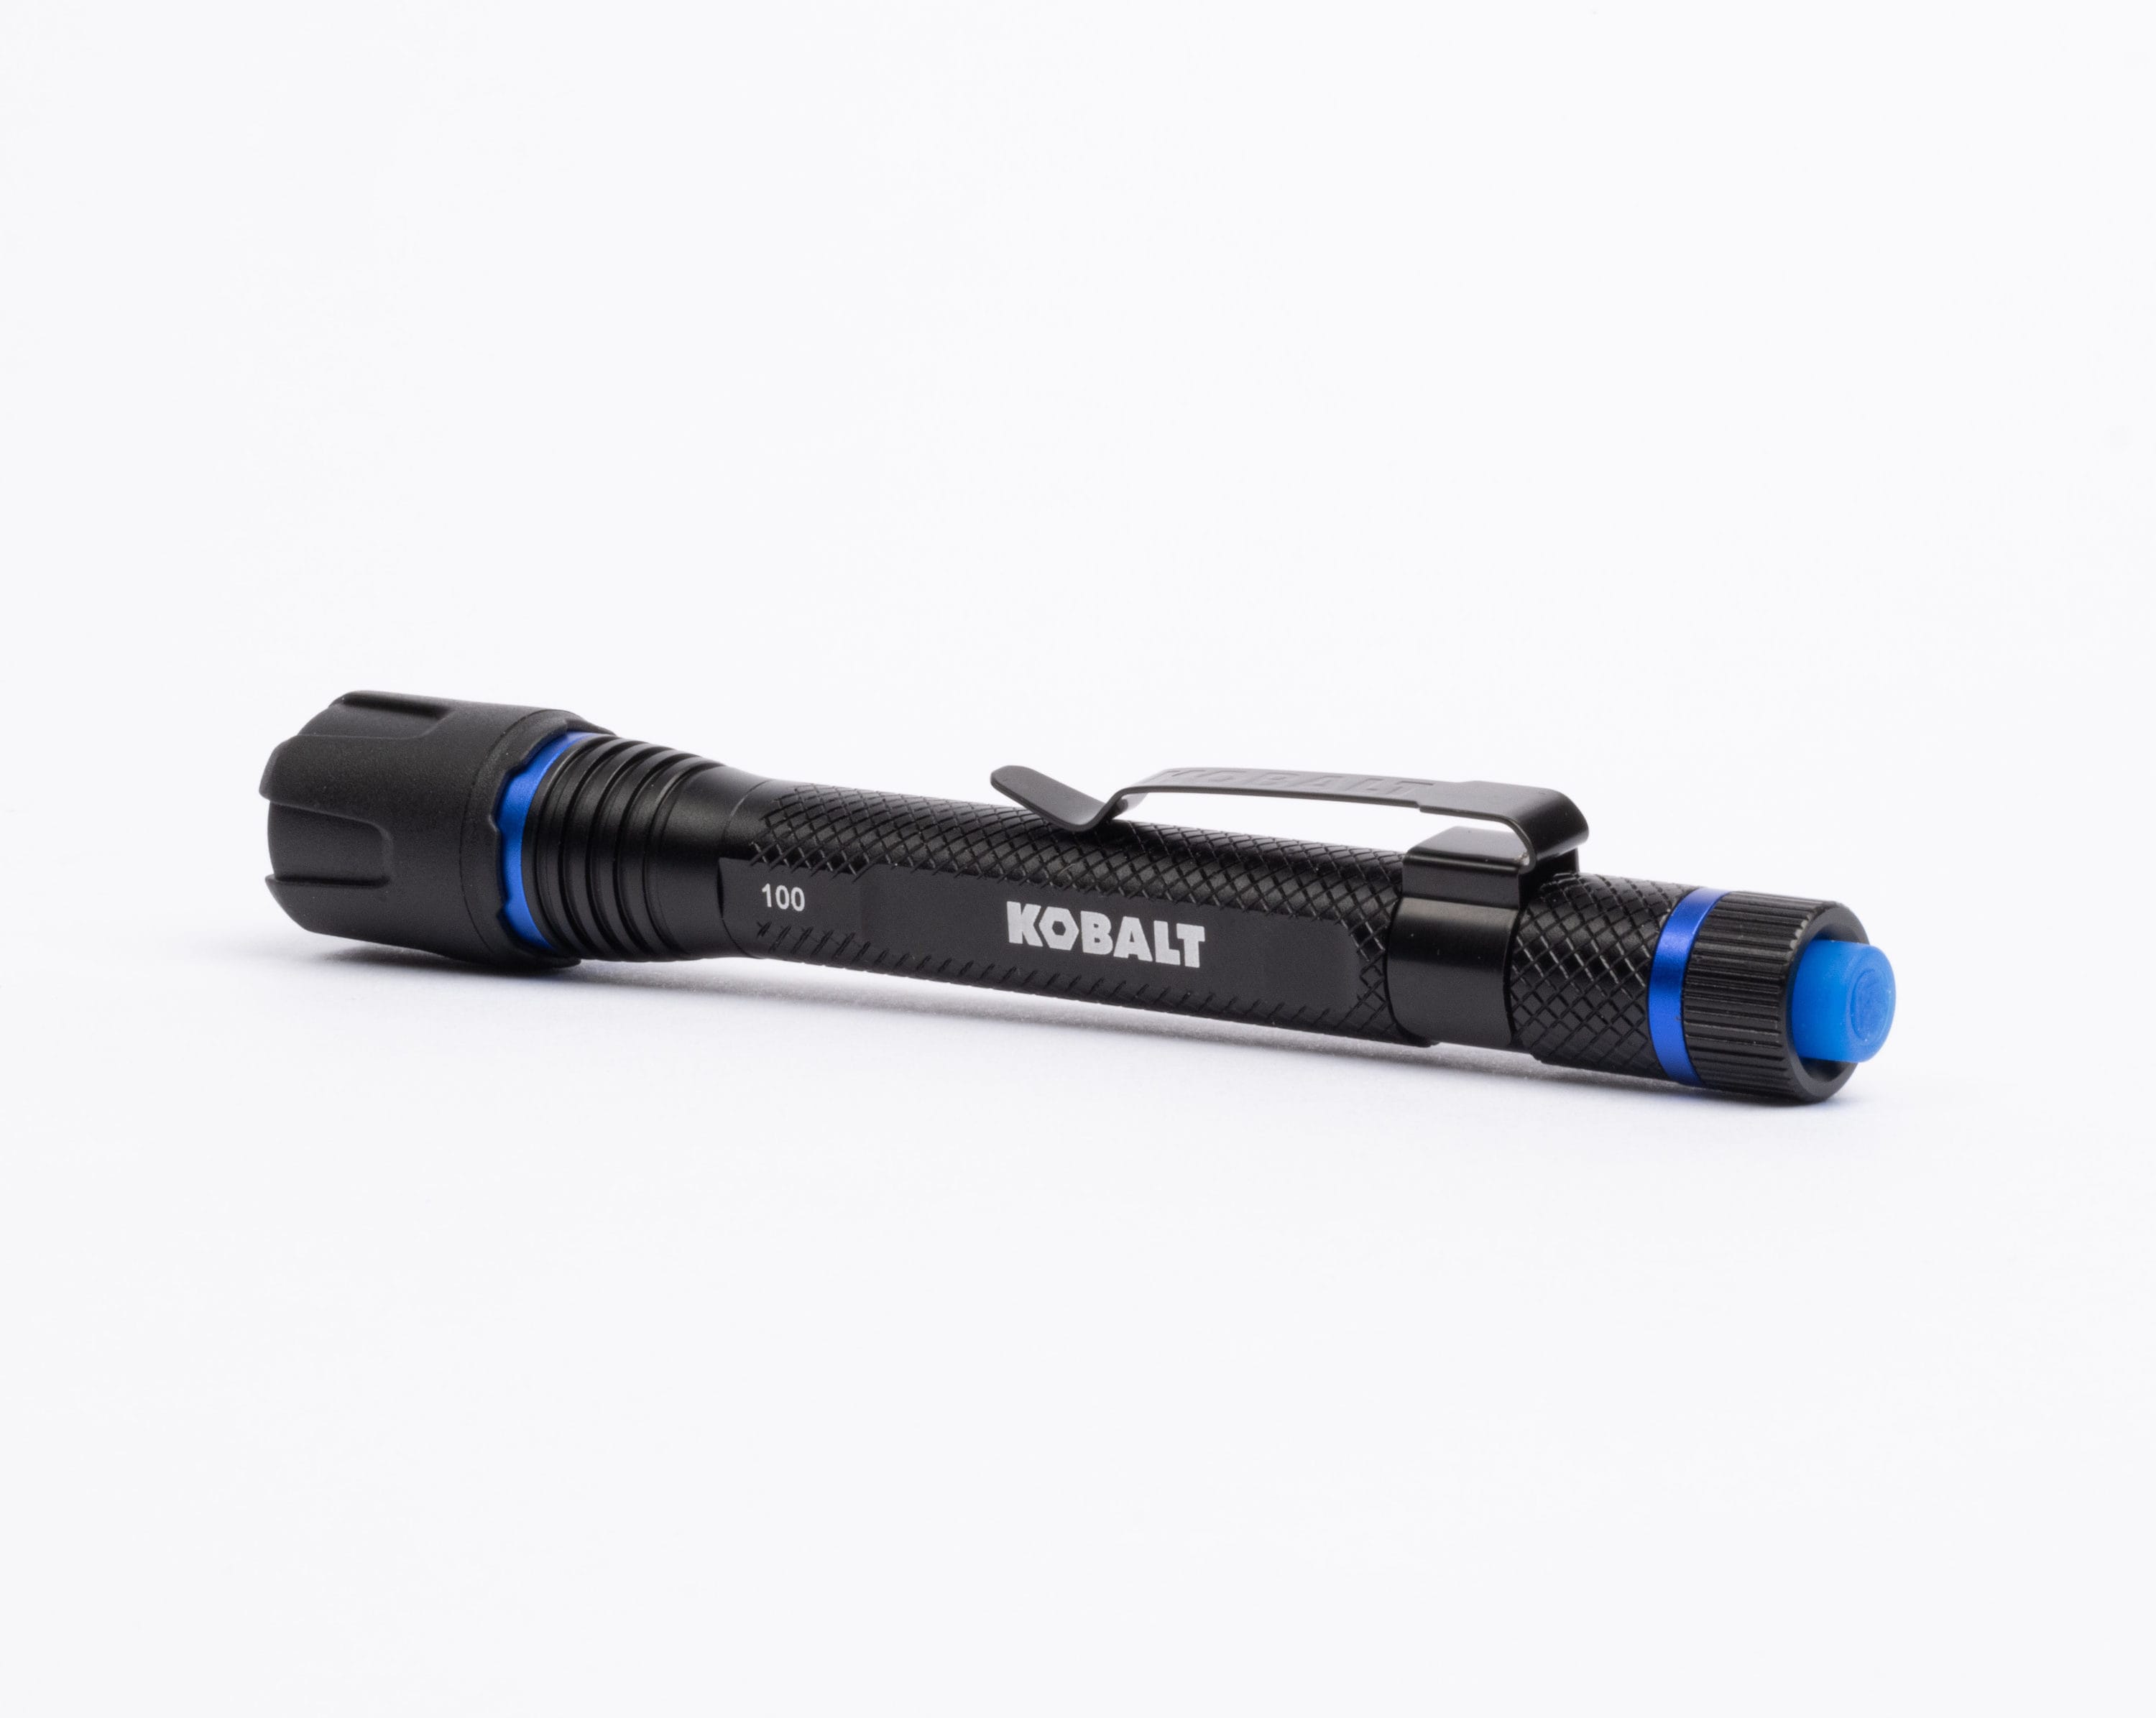 Virtually Kobalt Modes Included) in Flashlight at Waterproof (AAA Flashlights the 100-Lumen Indestructible LED Battery 2 department